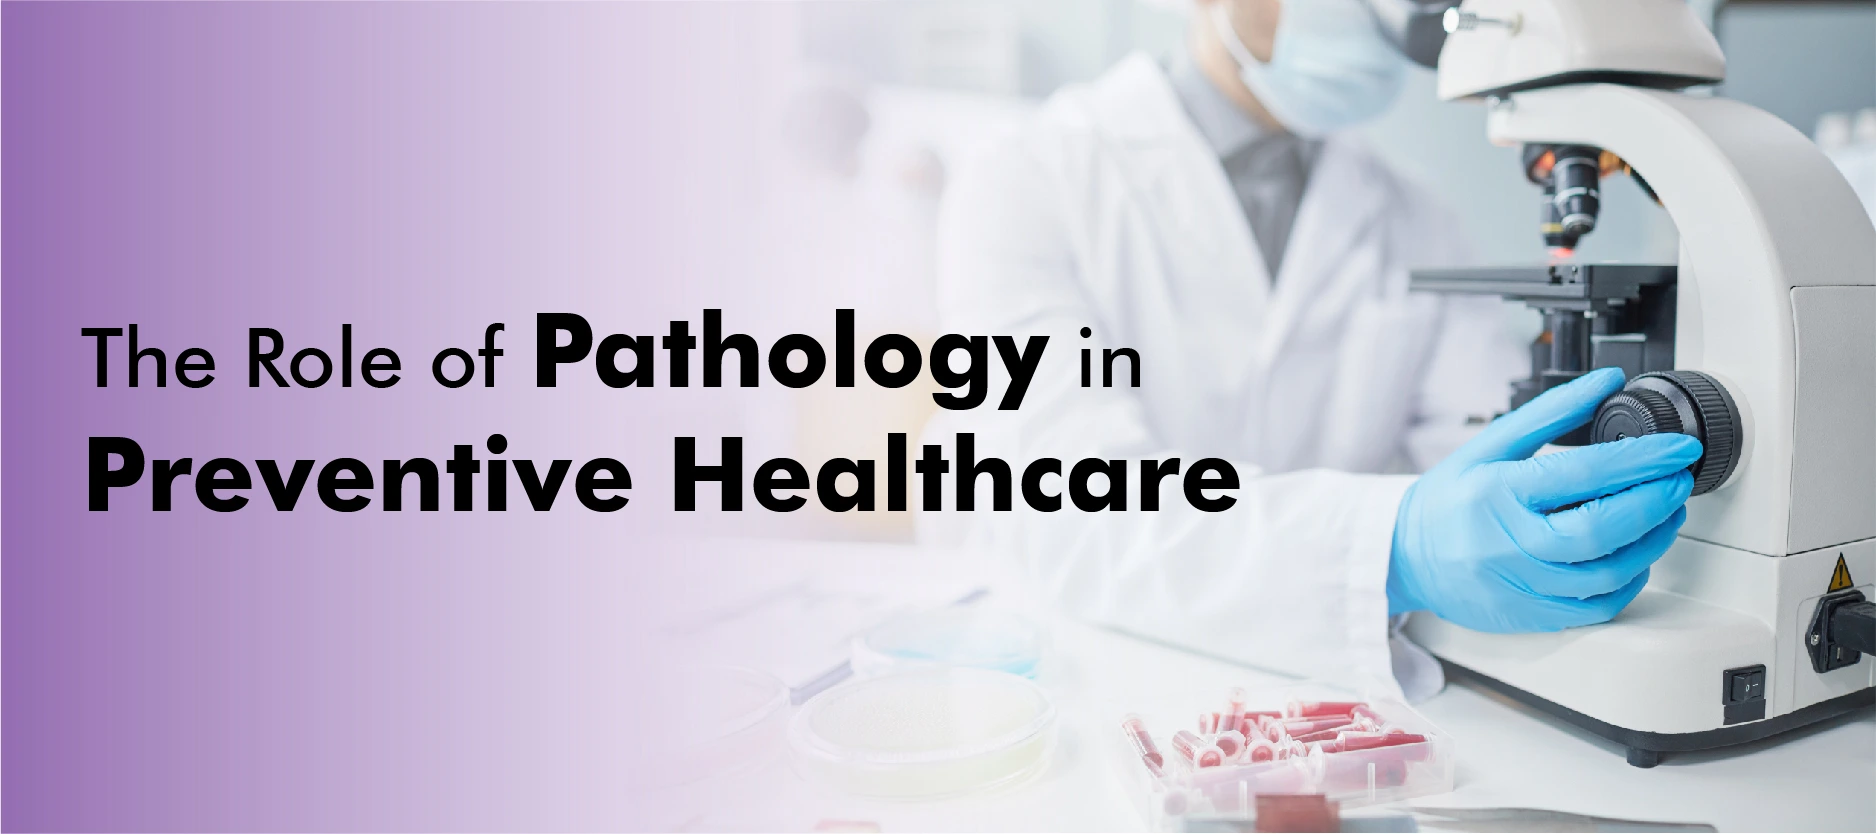 The Role of Pathology in Preventive Healthcare